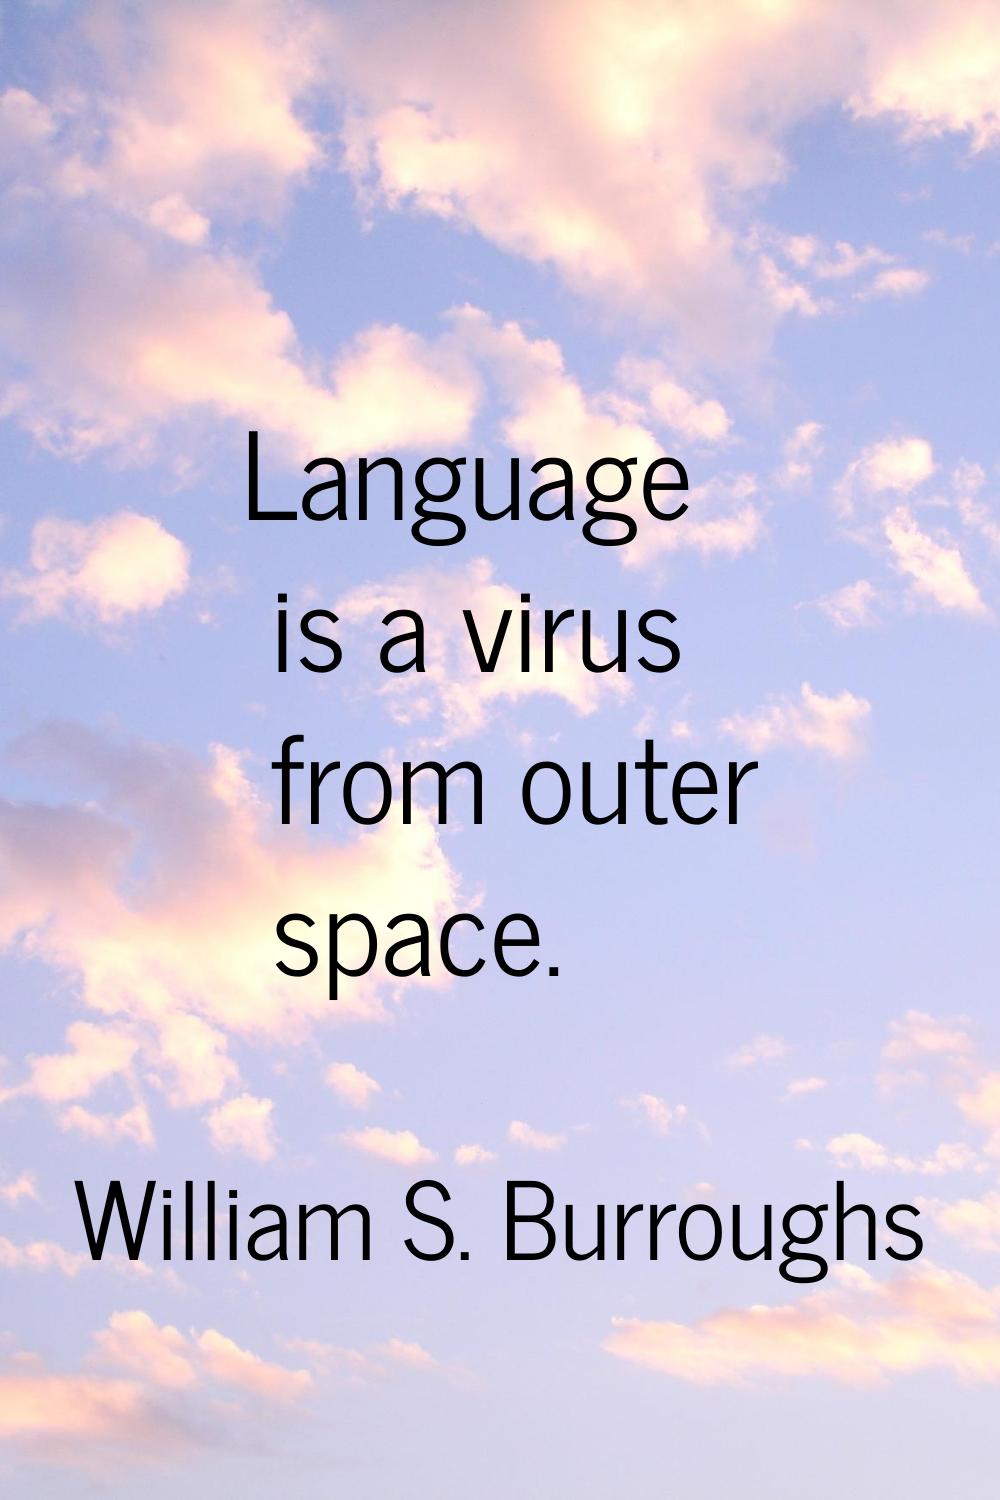 Language is a virus from outer space.